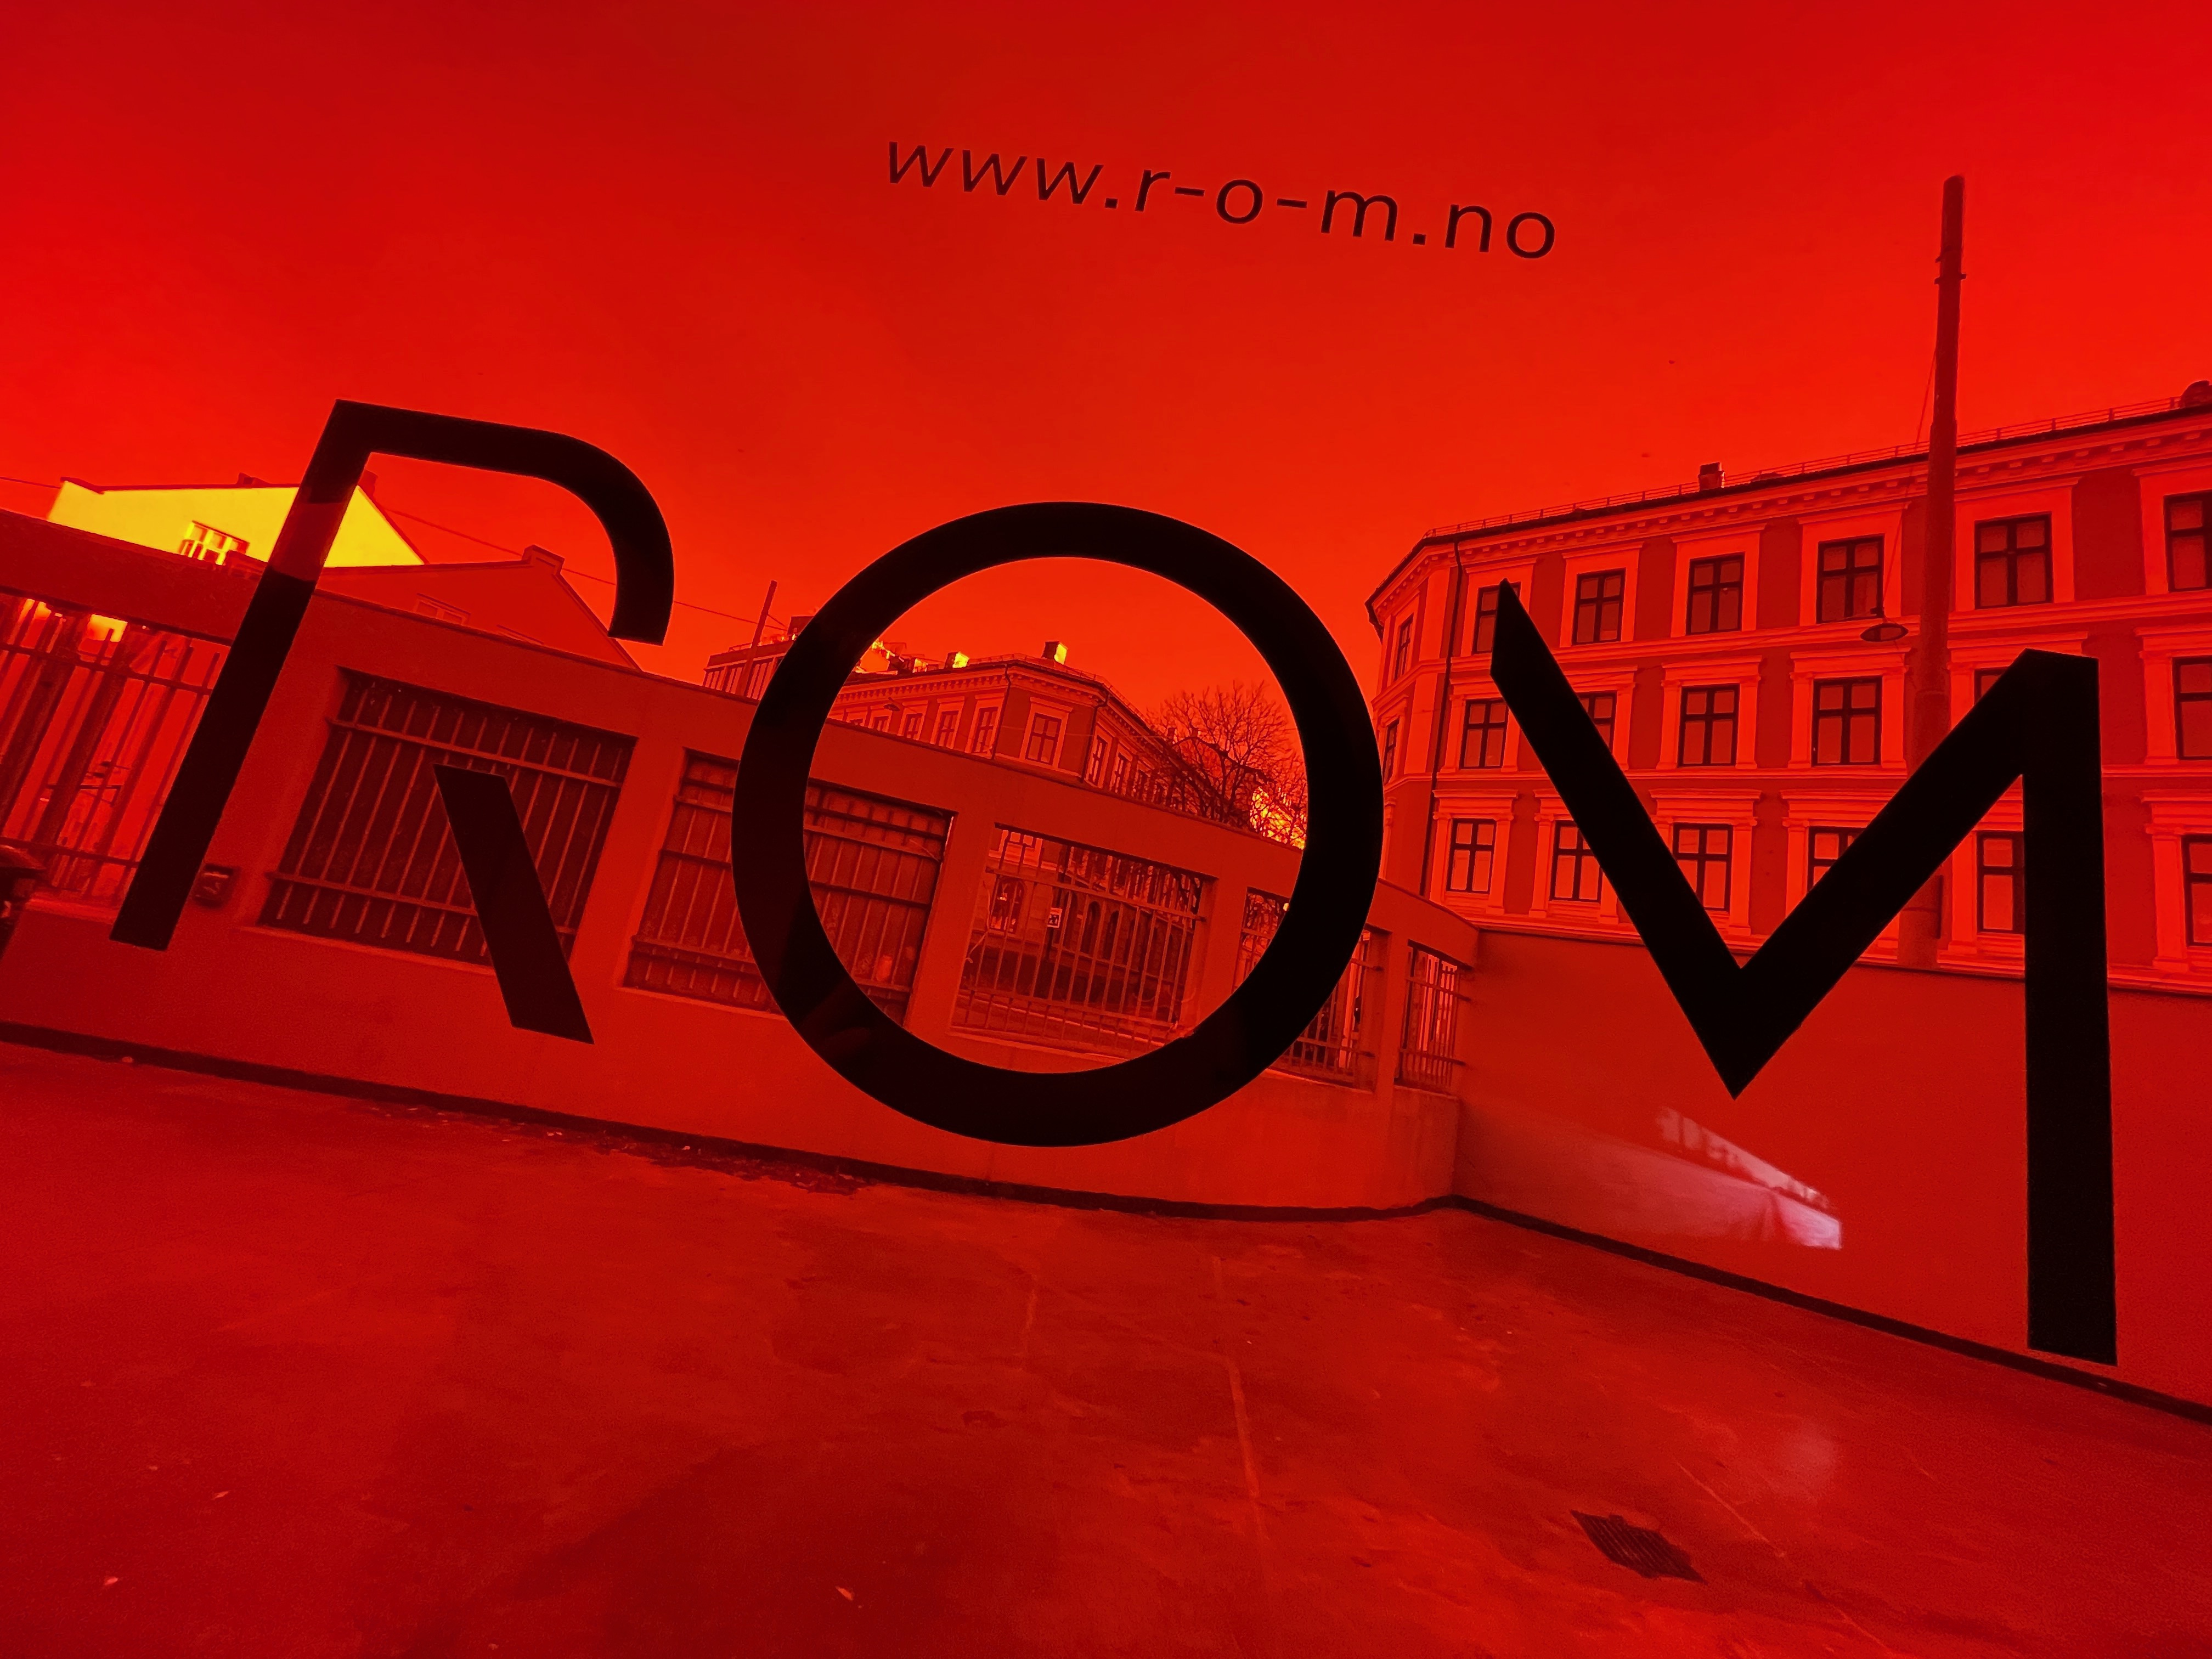 The exhibition at ROM for Art and Architecture opens on February 11 and runs until March 21, 2021.